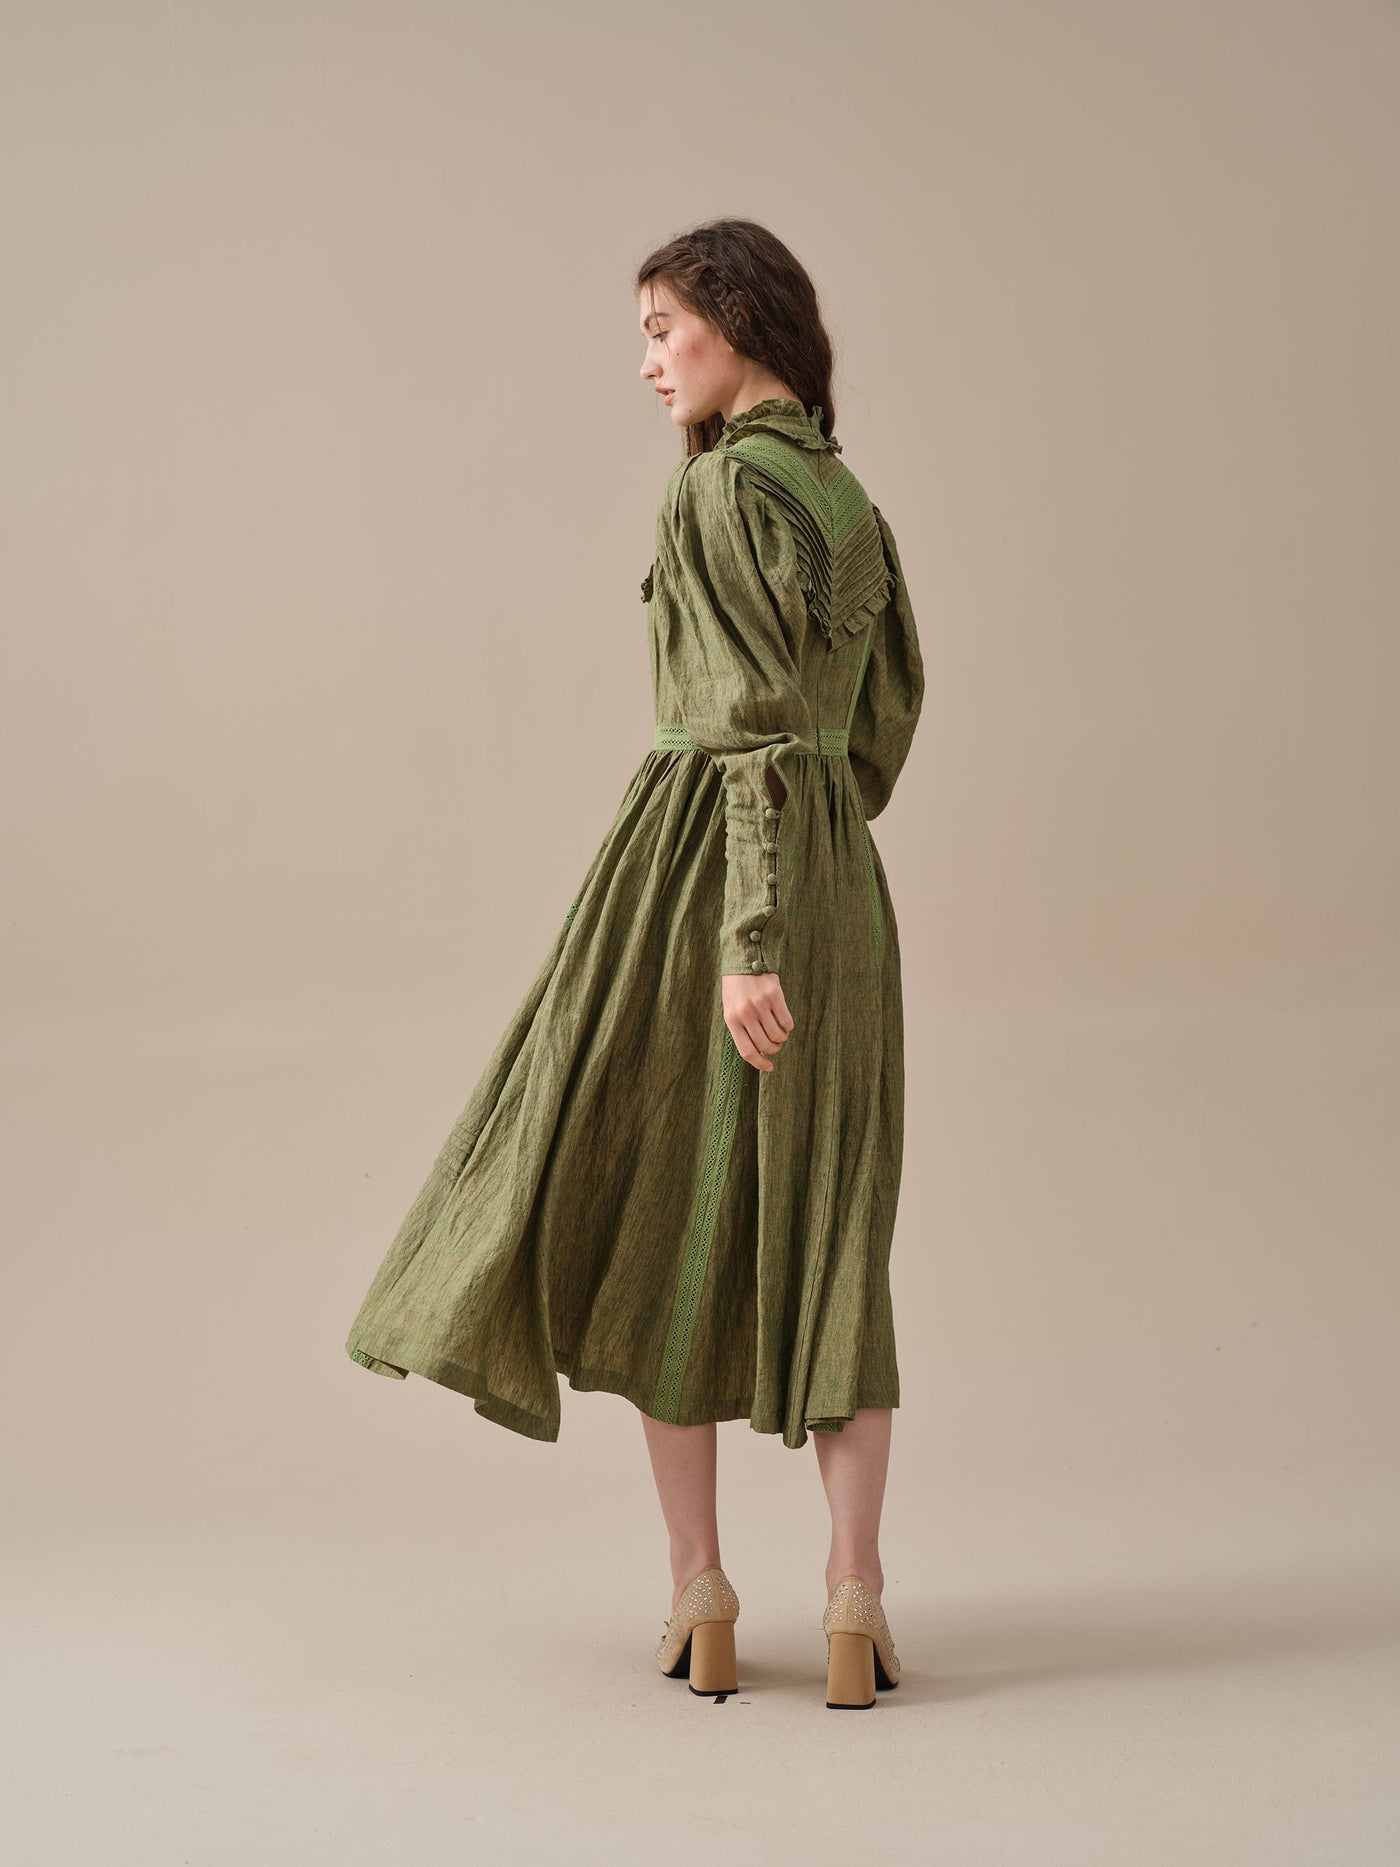 Mary 18 | vintage linen dress gown